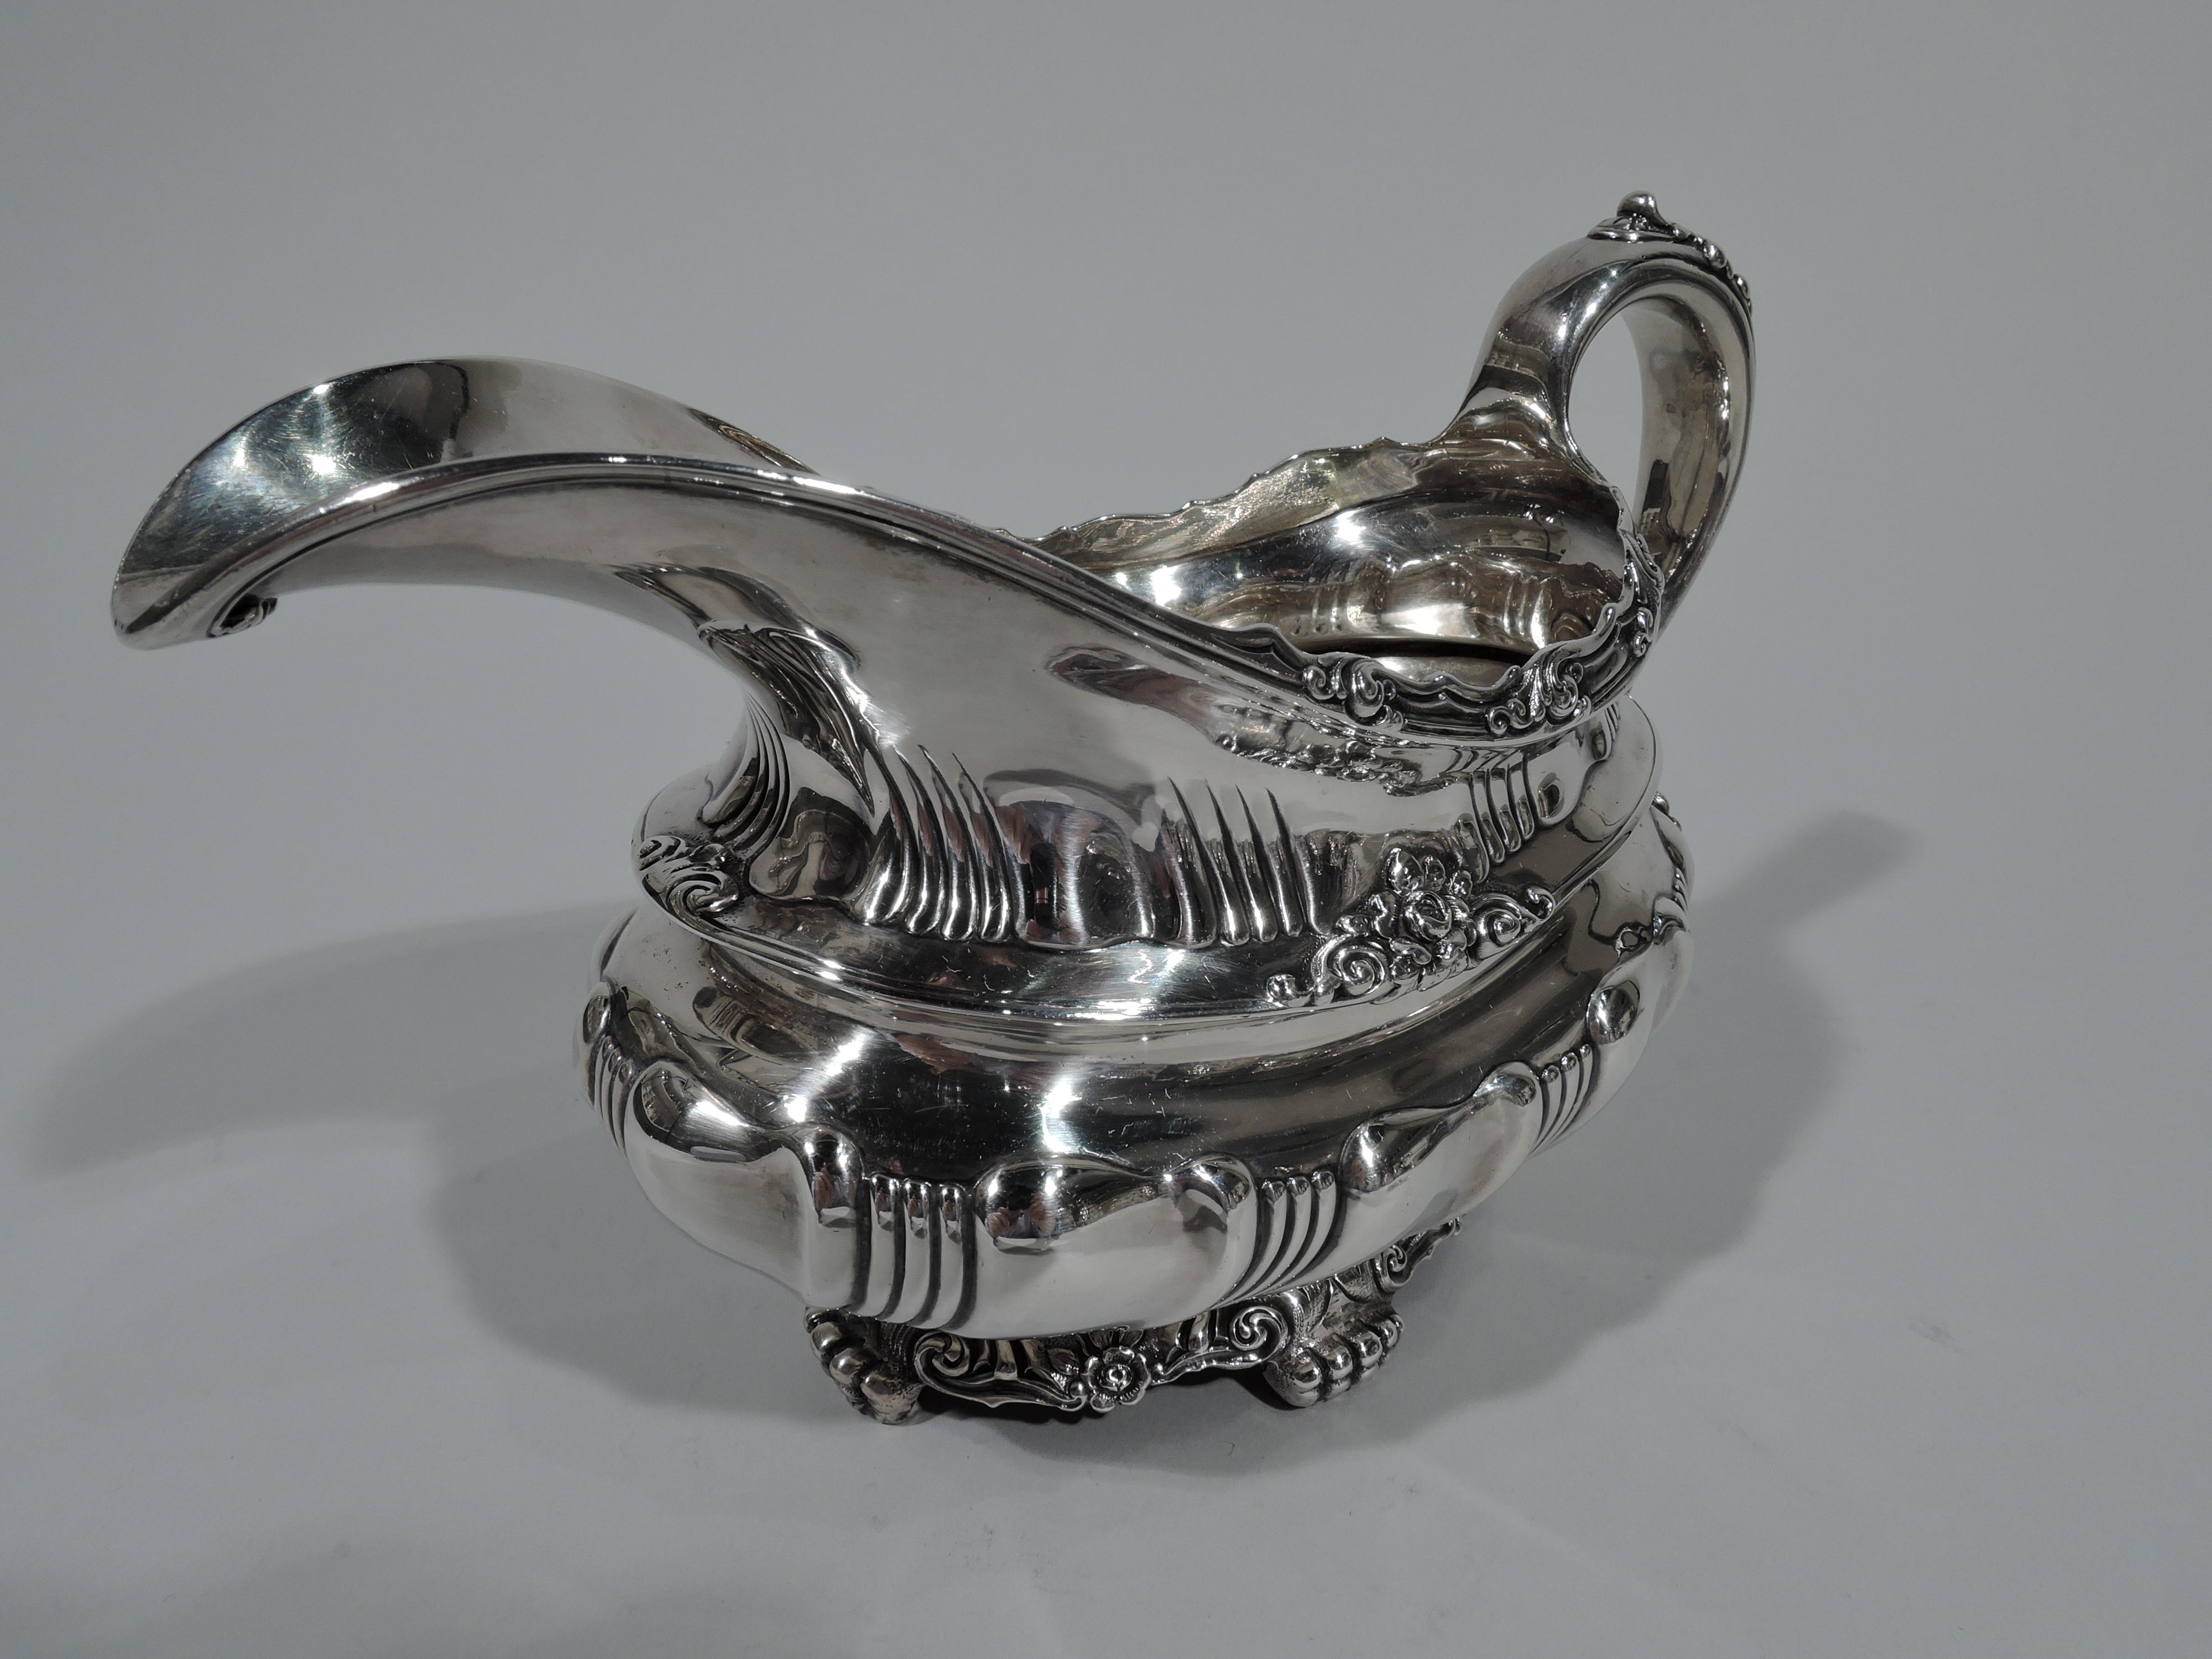 Fancy sterling silver gravy boat. Made by Tiffany & Co. in New York. Bellied oval with helmet mouth, leaf-capped high-looping scroll handle, and foot ring with 4 paw supports. Alternating scrolled fluting and ribbing. Chased flowers and leafy